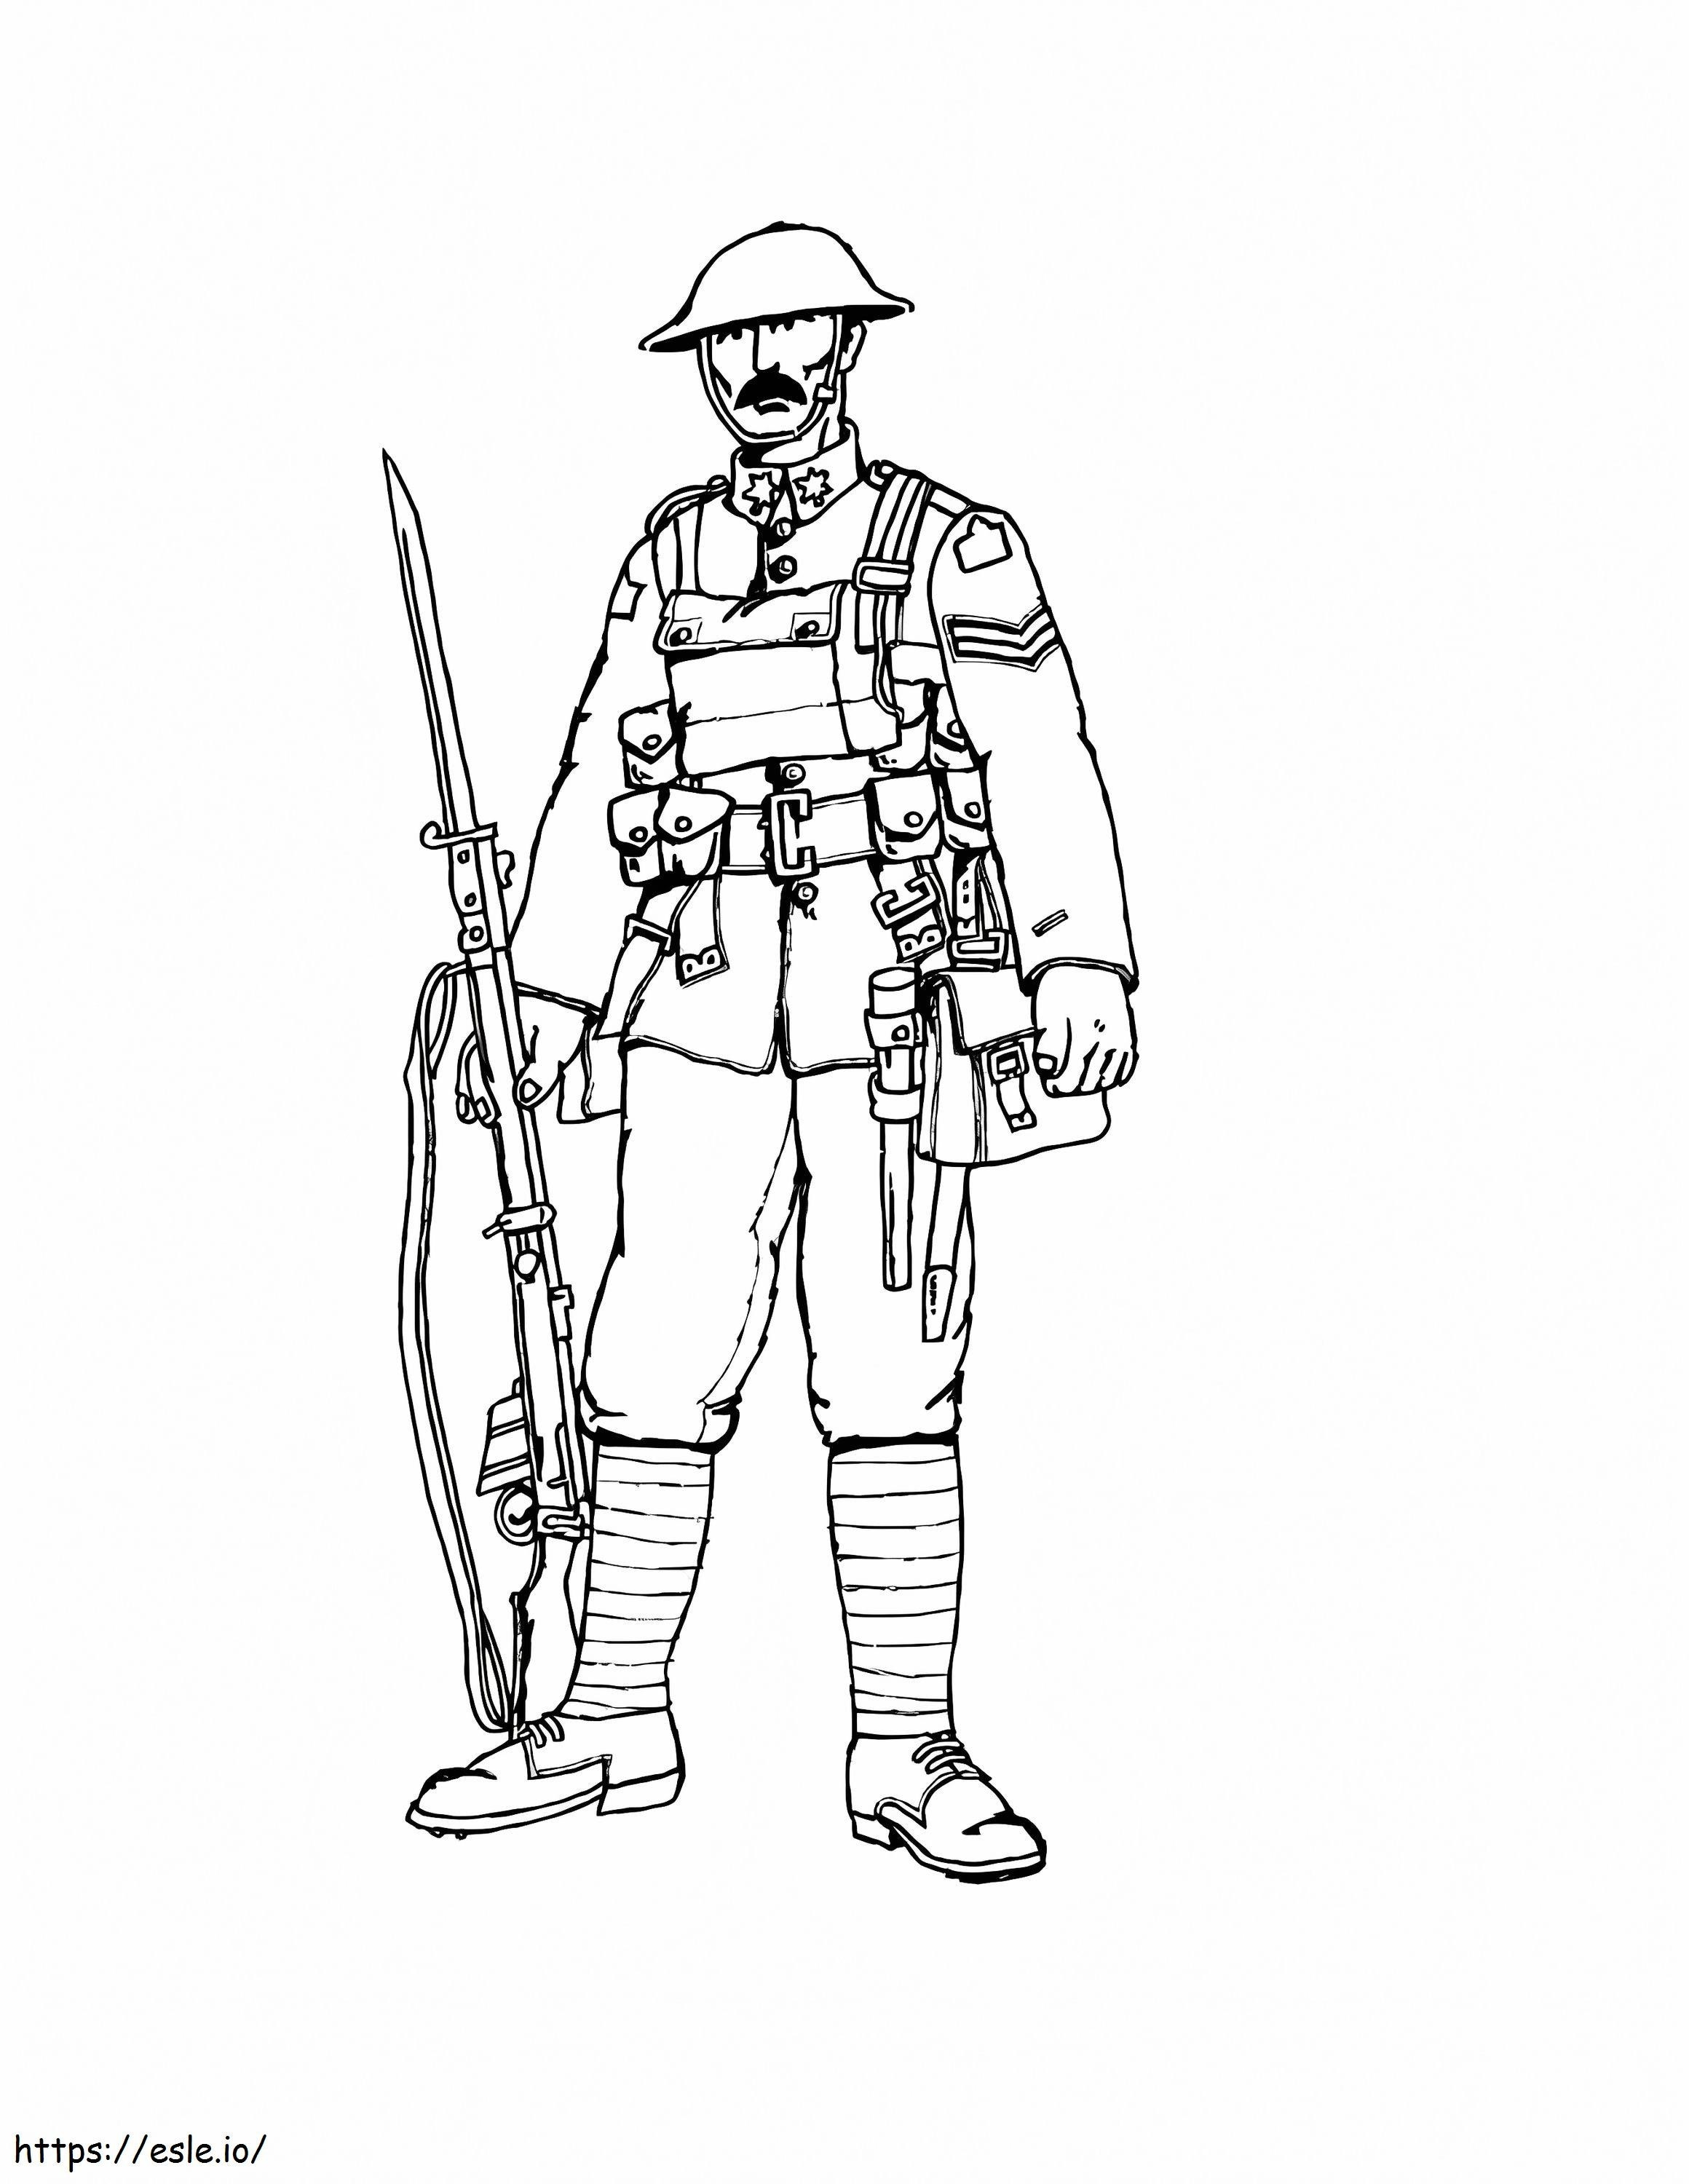 Canadian Soldier coloring page